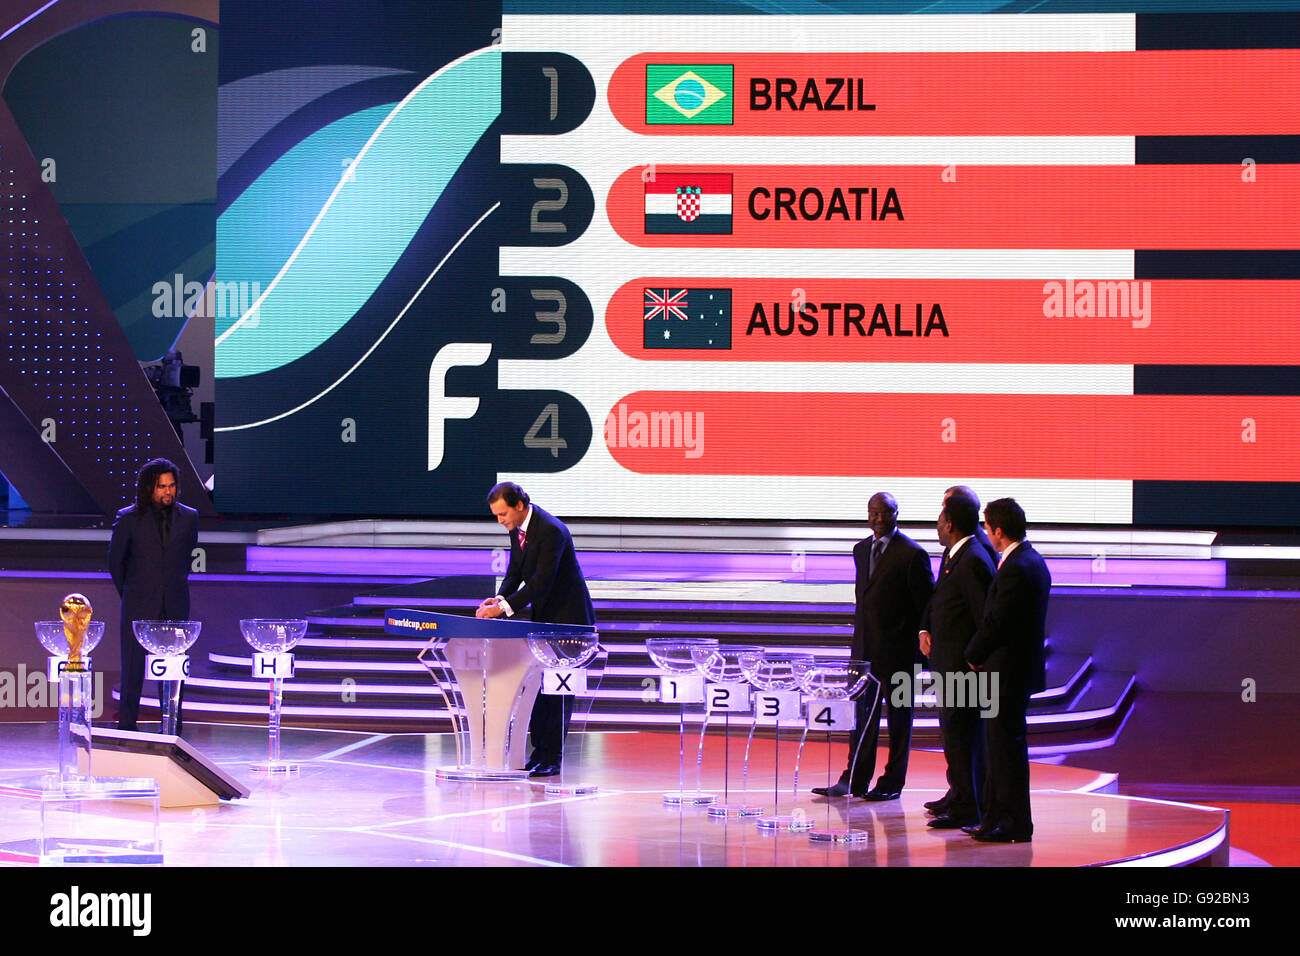 Brazil are drawn in Group F with Croatia and Australia during the 2006 FIFA World Cup final draw Stock Photo